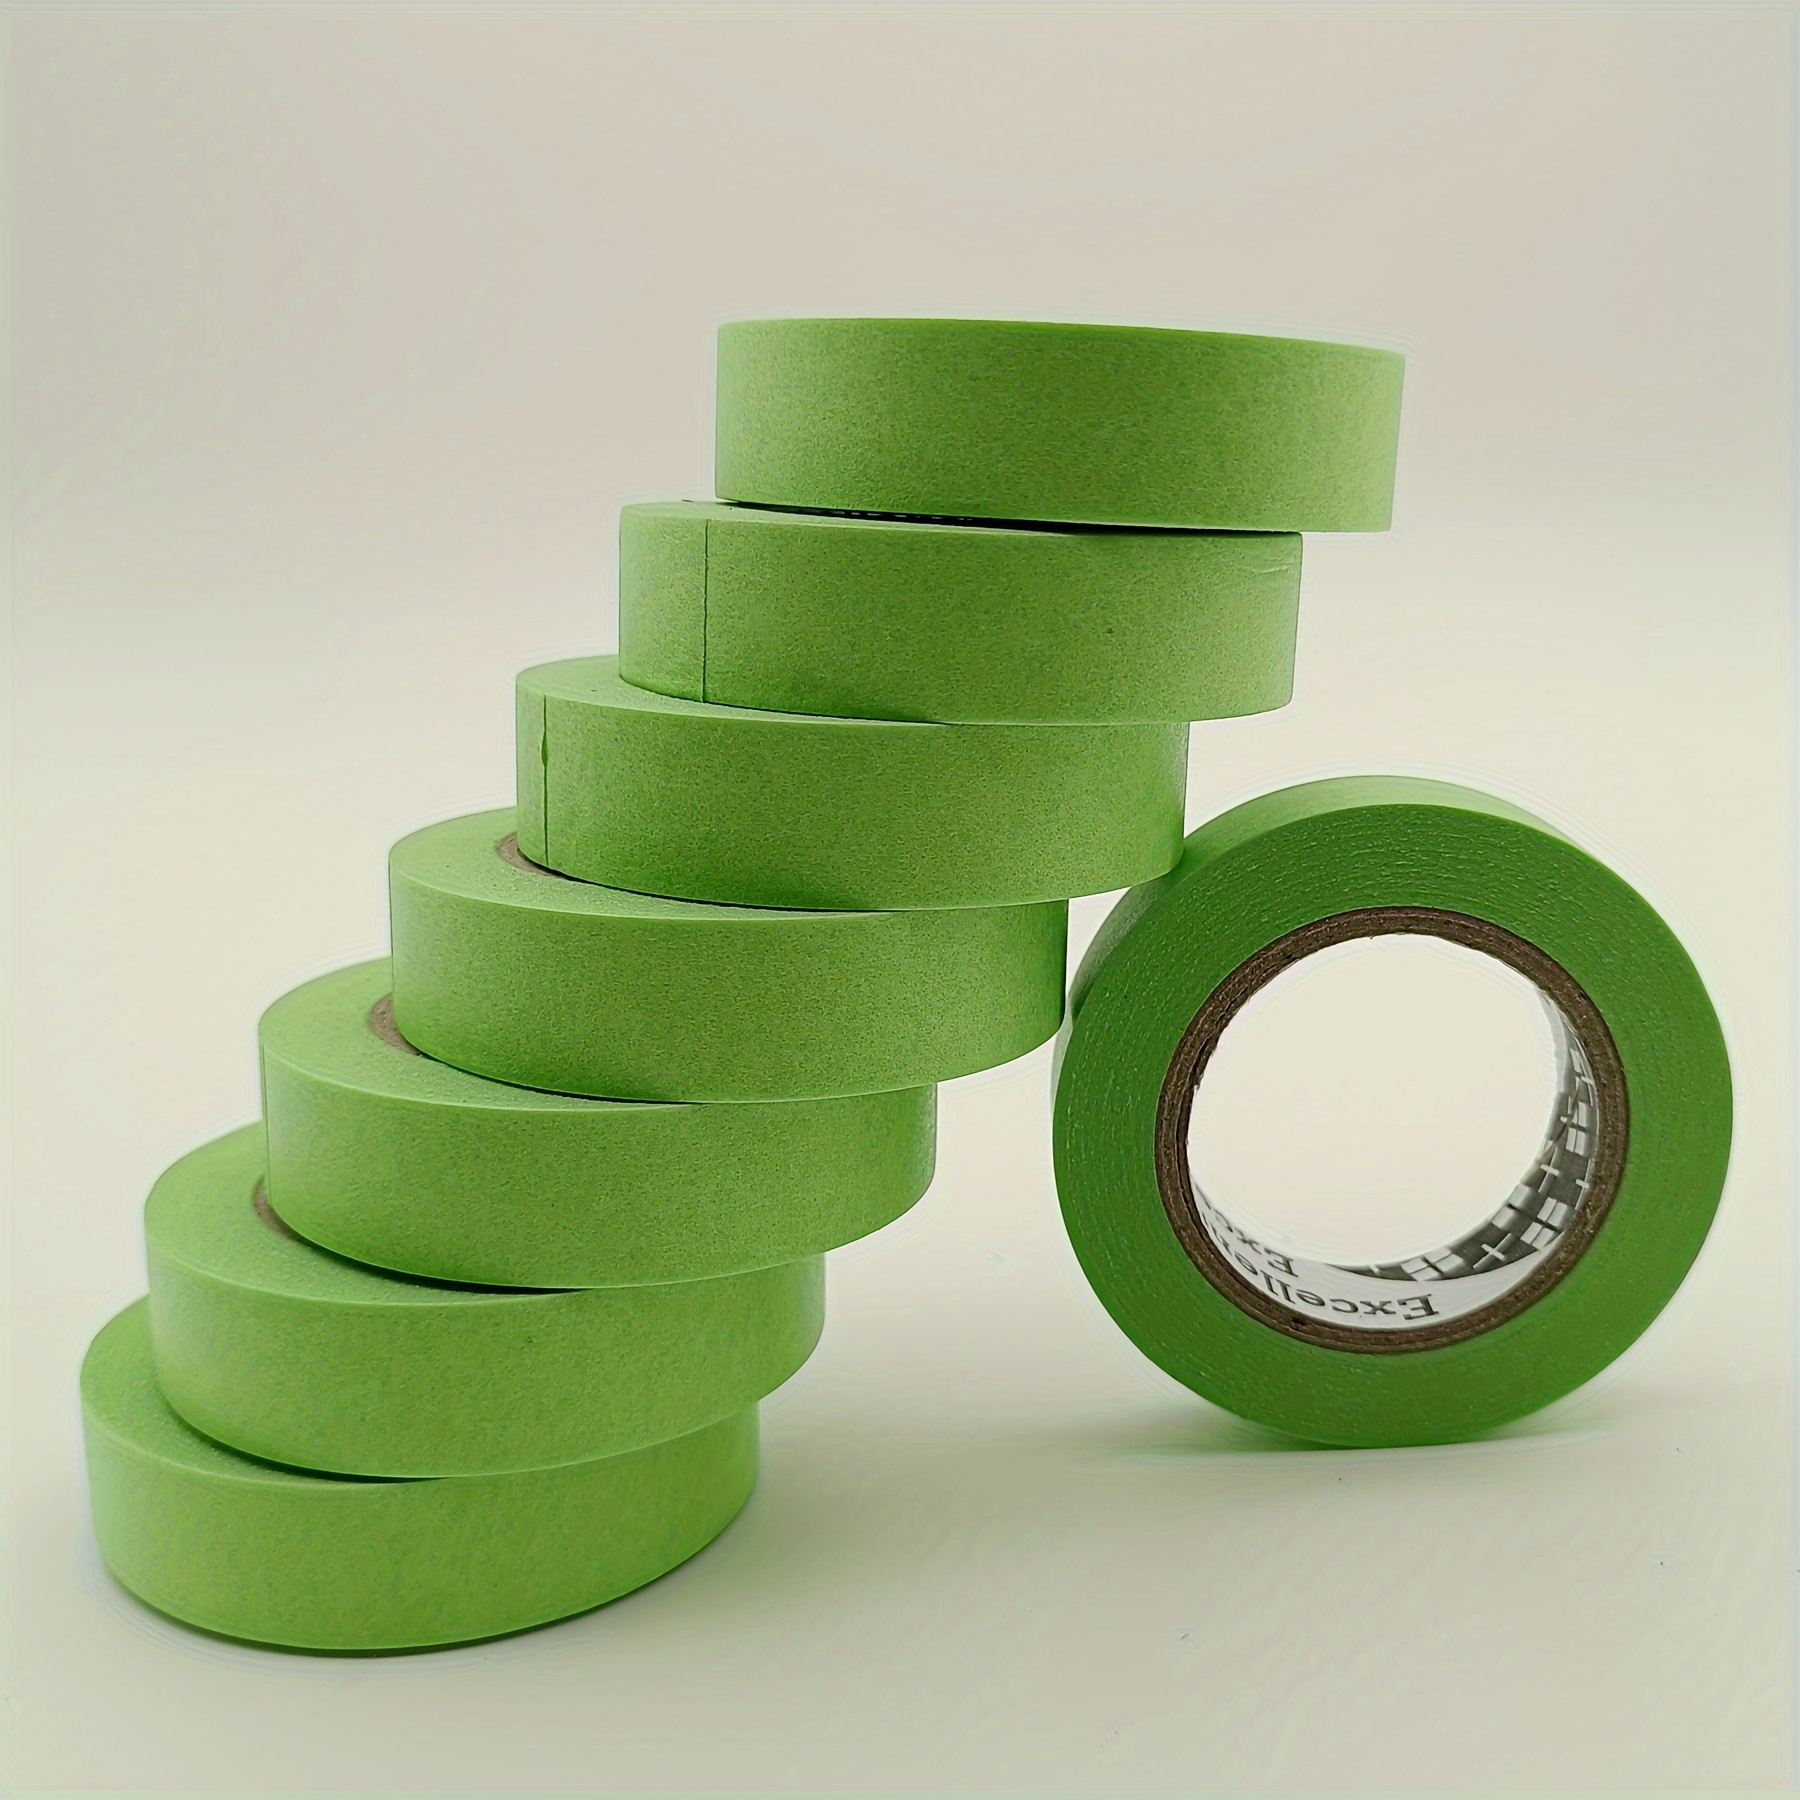 

Easy-remove Green Washi Paint Tape, 0.59in X 59ft - Multi-surface Protection, Indoor Use, Leaves No Residue